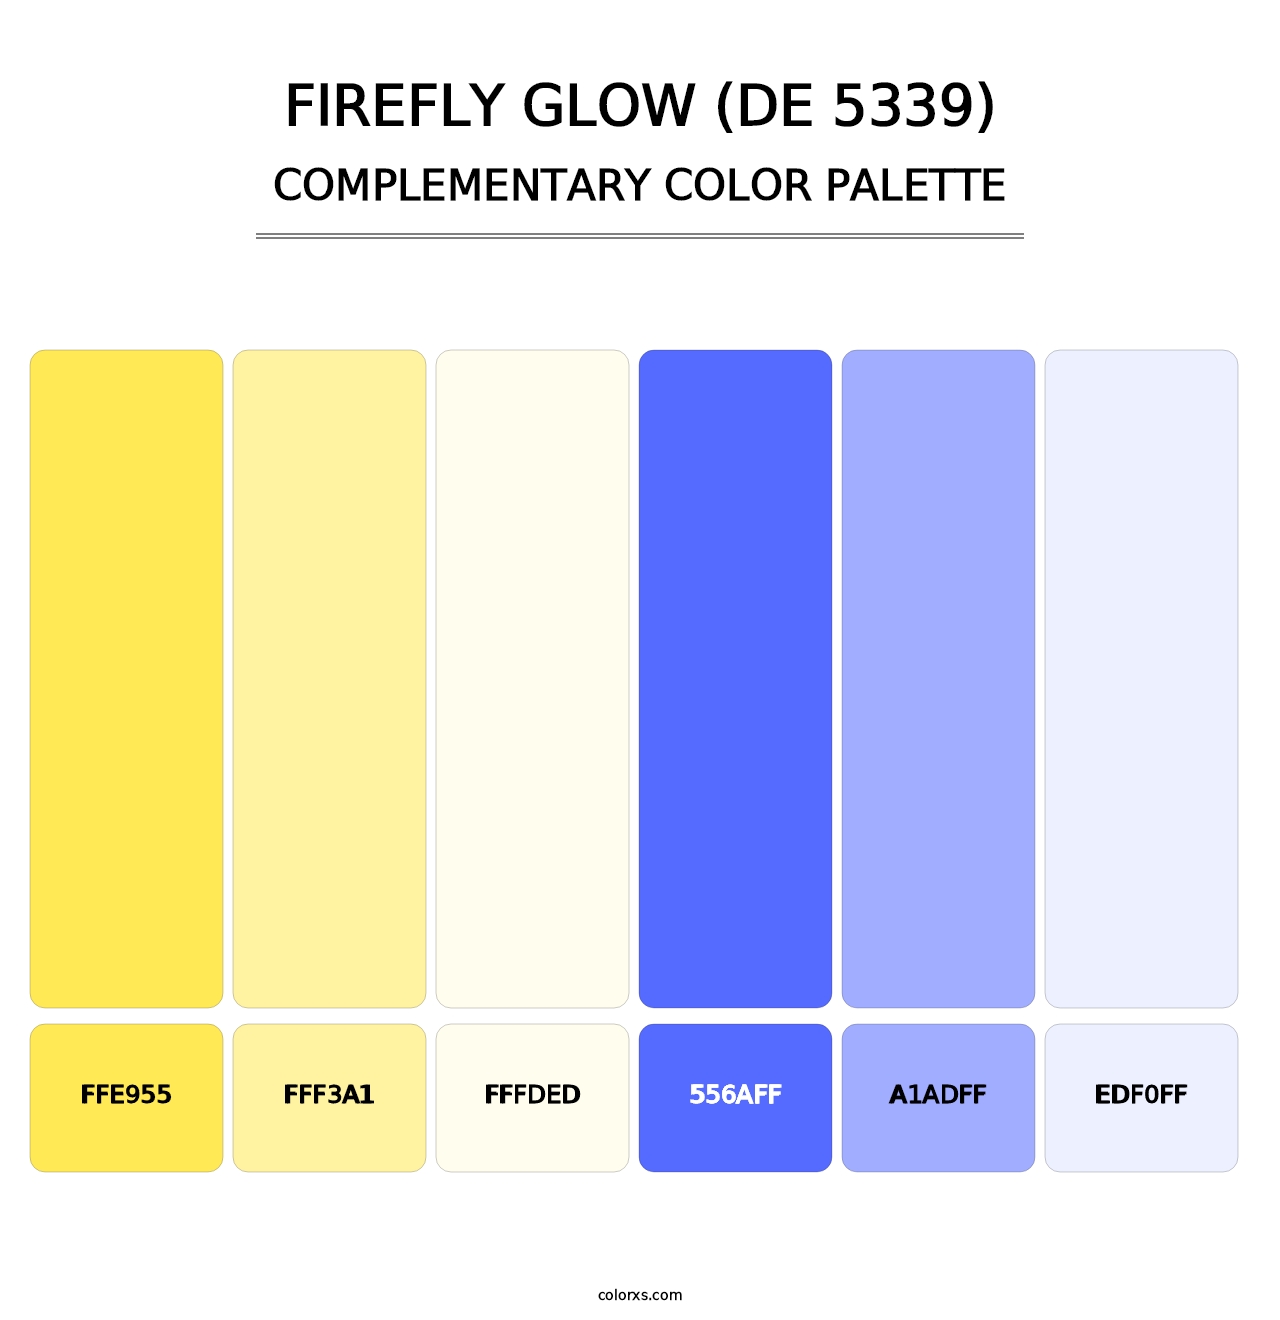 Firefly Glow (DE 5339) - Complementary Color Palette